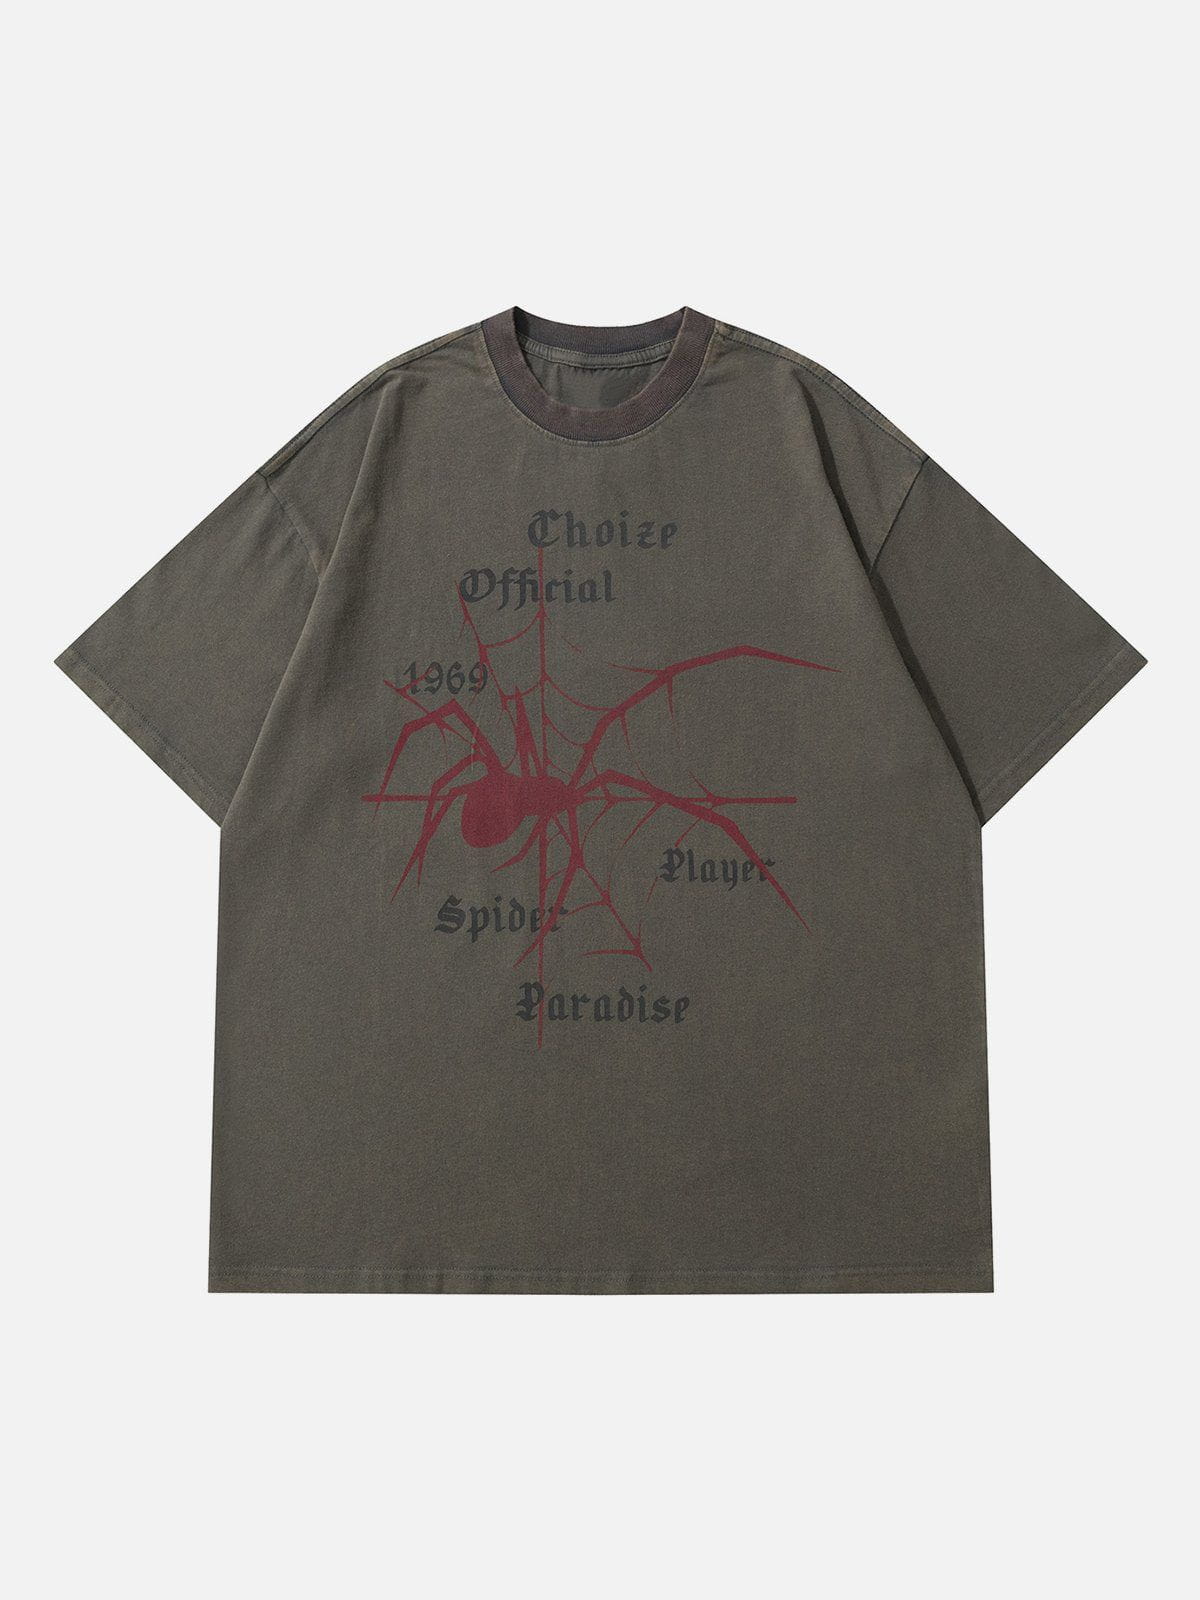 Sneakerland™ - Spider Print Washed Tee